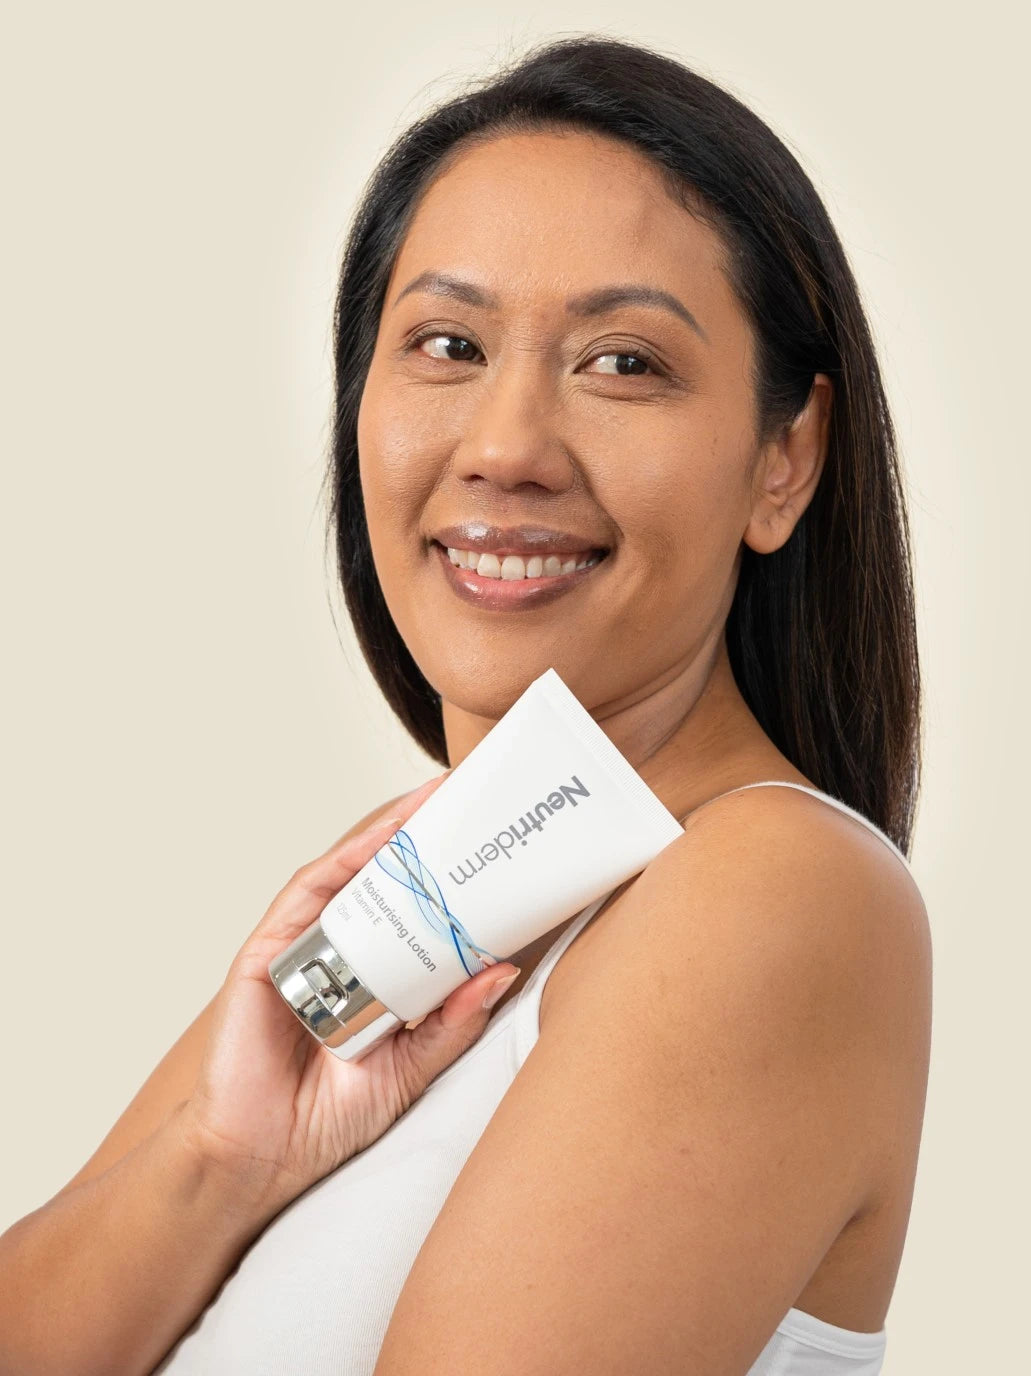 Hydrate your skin with Neutriderm skincare